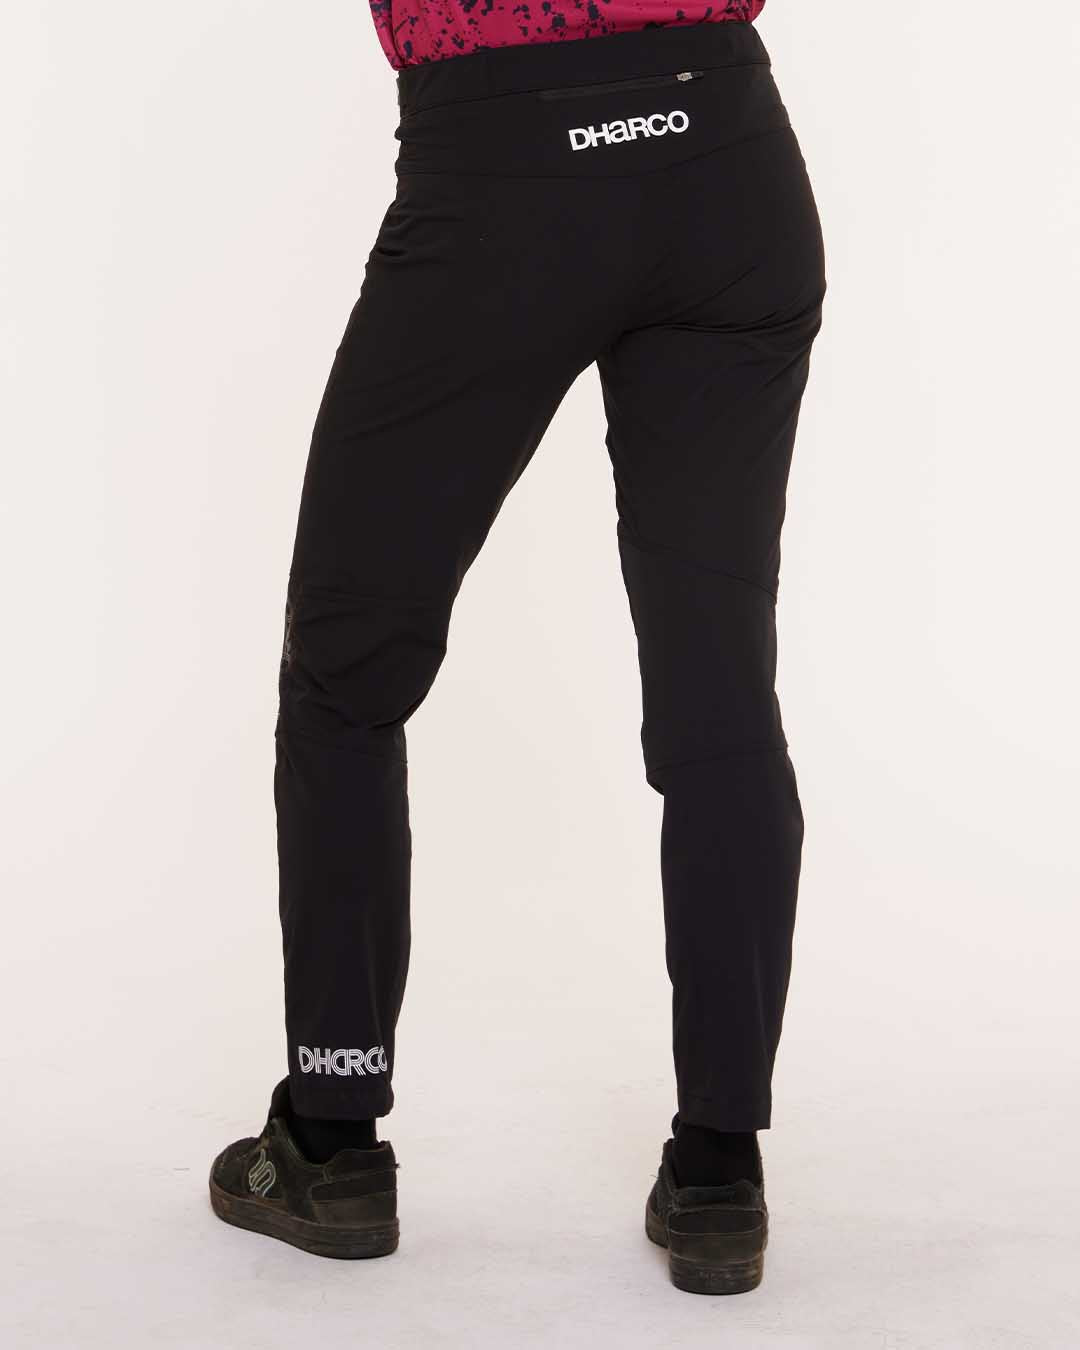 Out-of-Pocket Women's Joggers – Non-Equity Partner